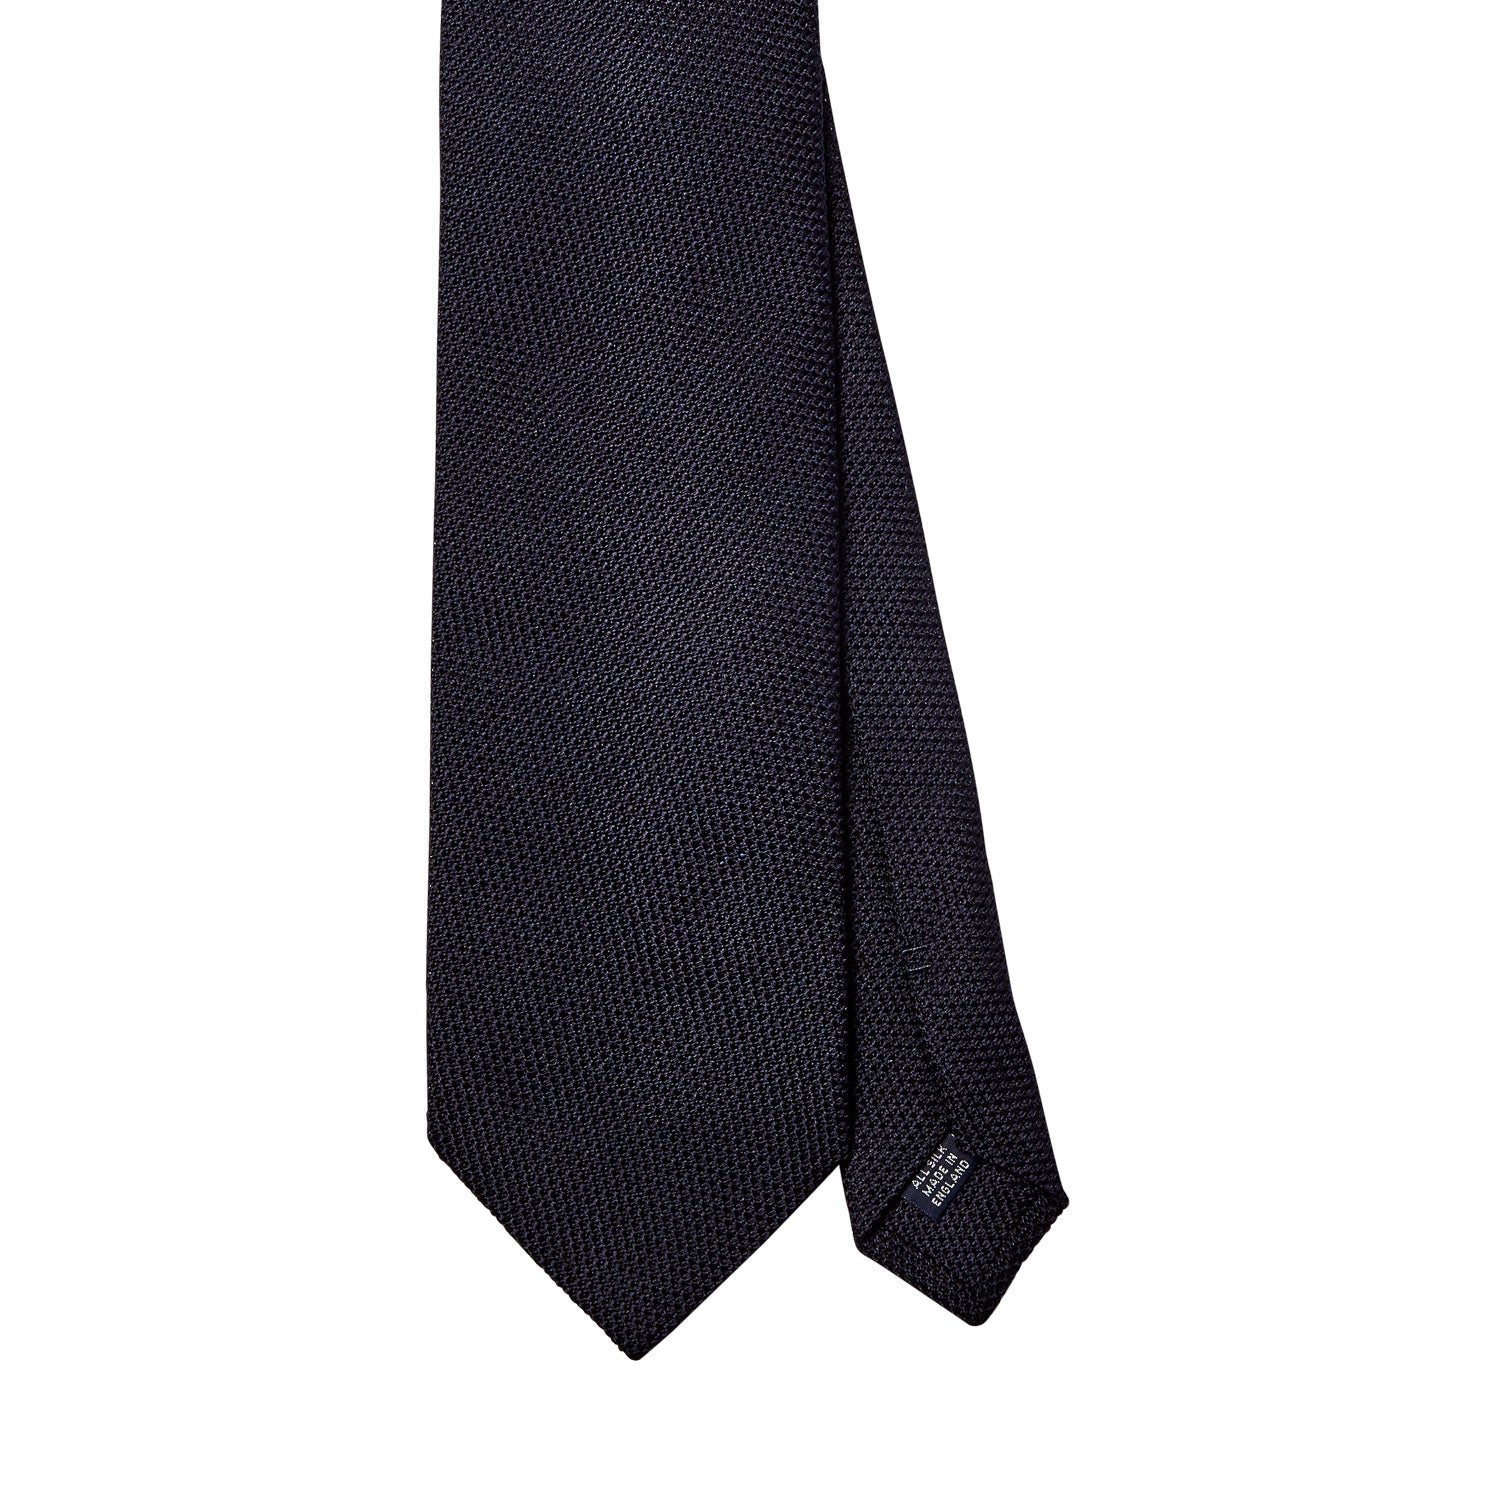 A high-quality, handmade Sovereign Grade Grenadine Fina Midnight Tie from KirbyAllison.com on a white background from the United Kingdom.